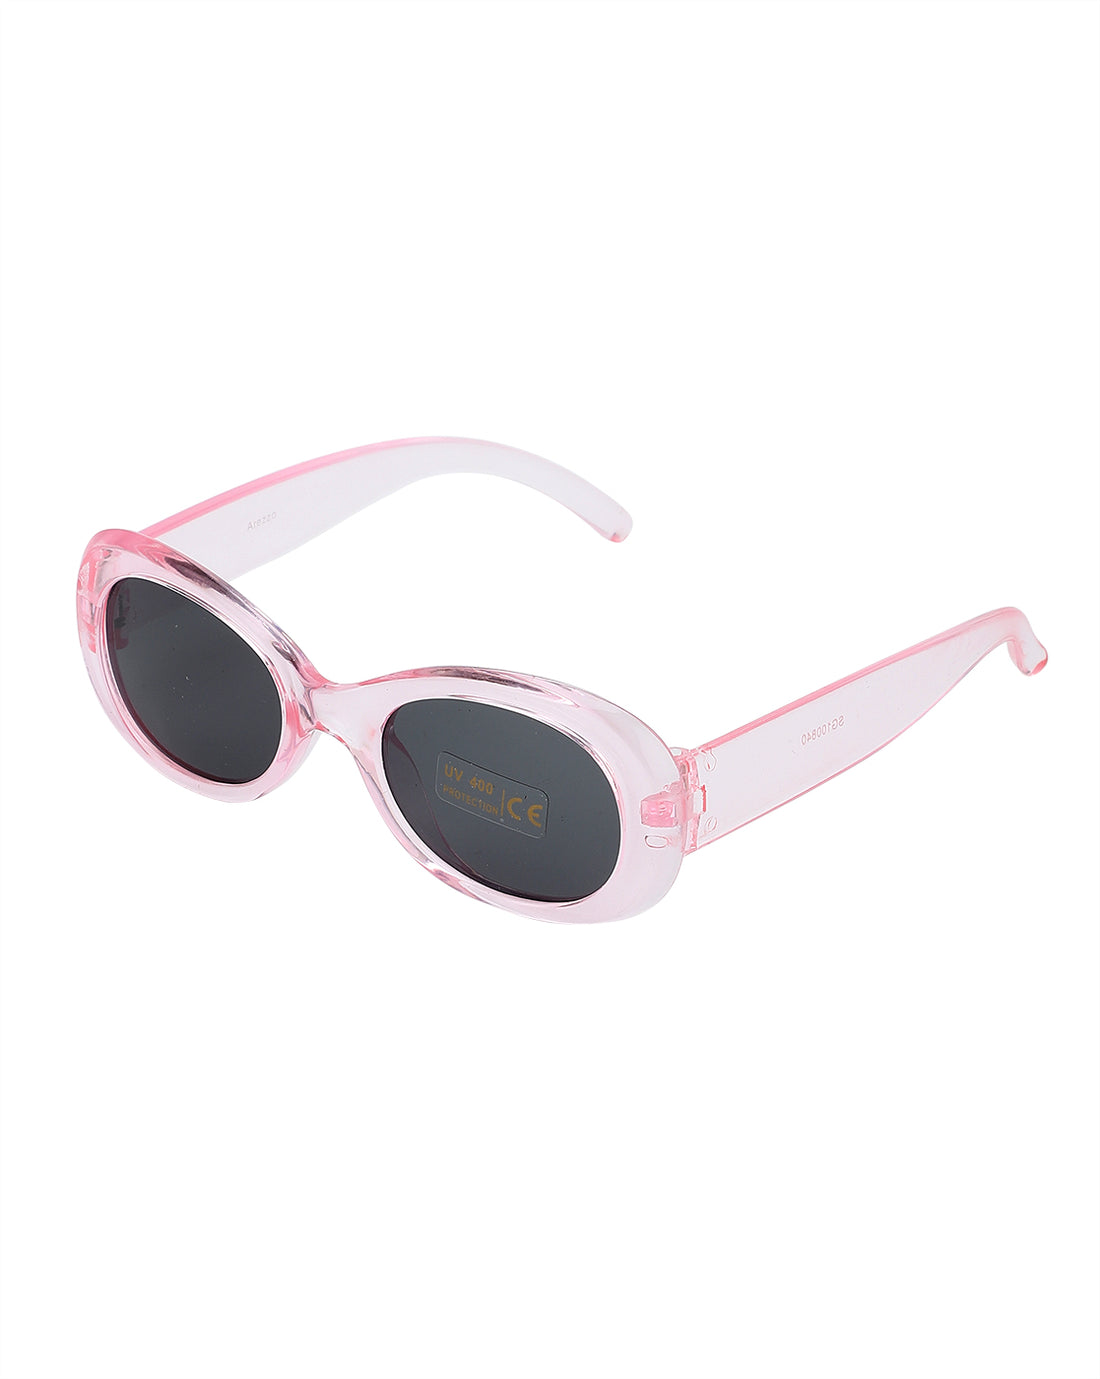 Carlton London Oval Sunglasses with UV Protected Lens For Girl